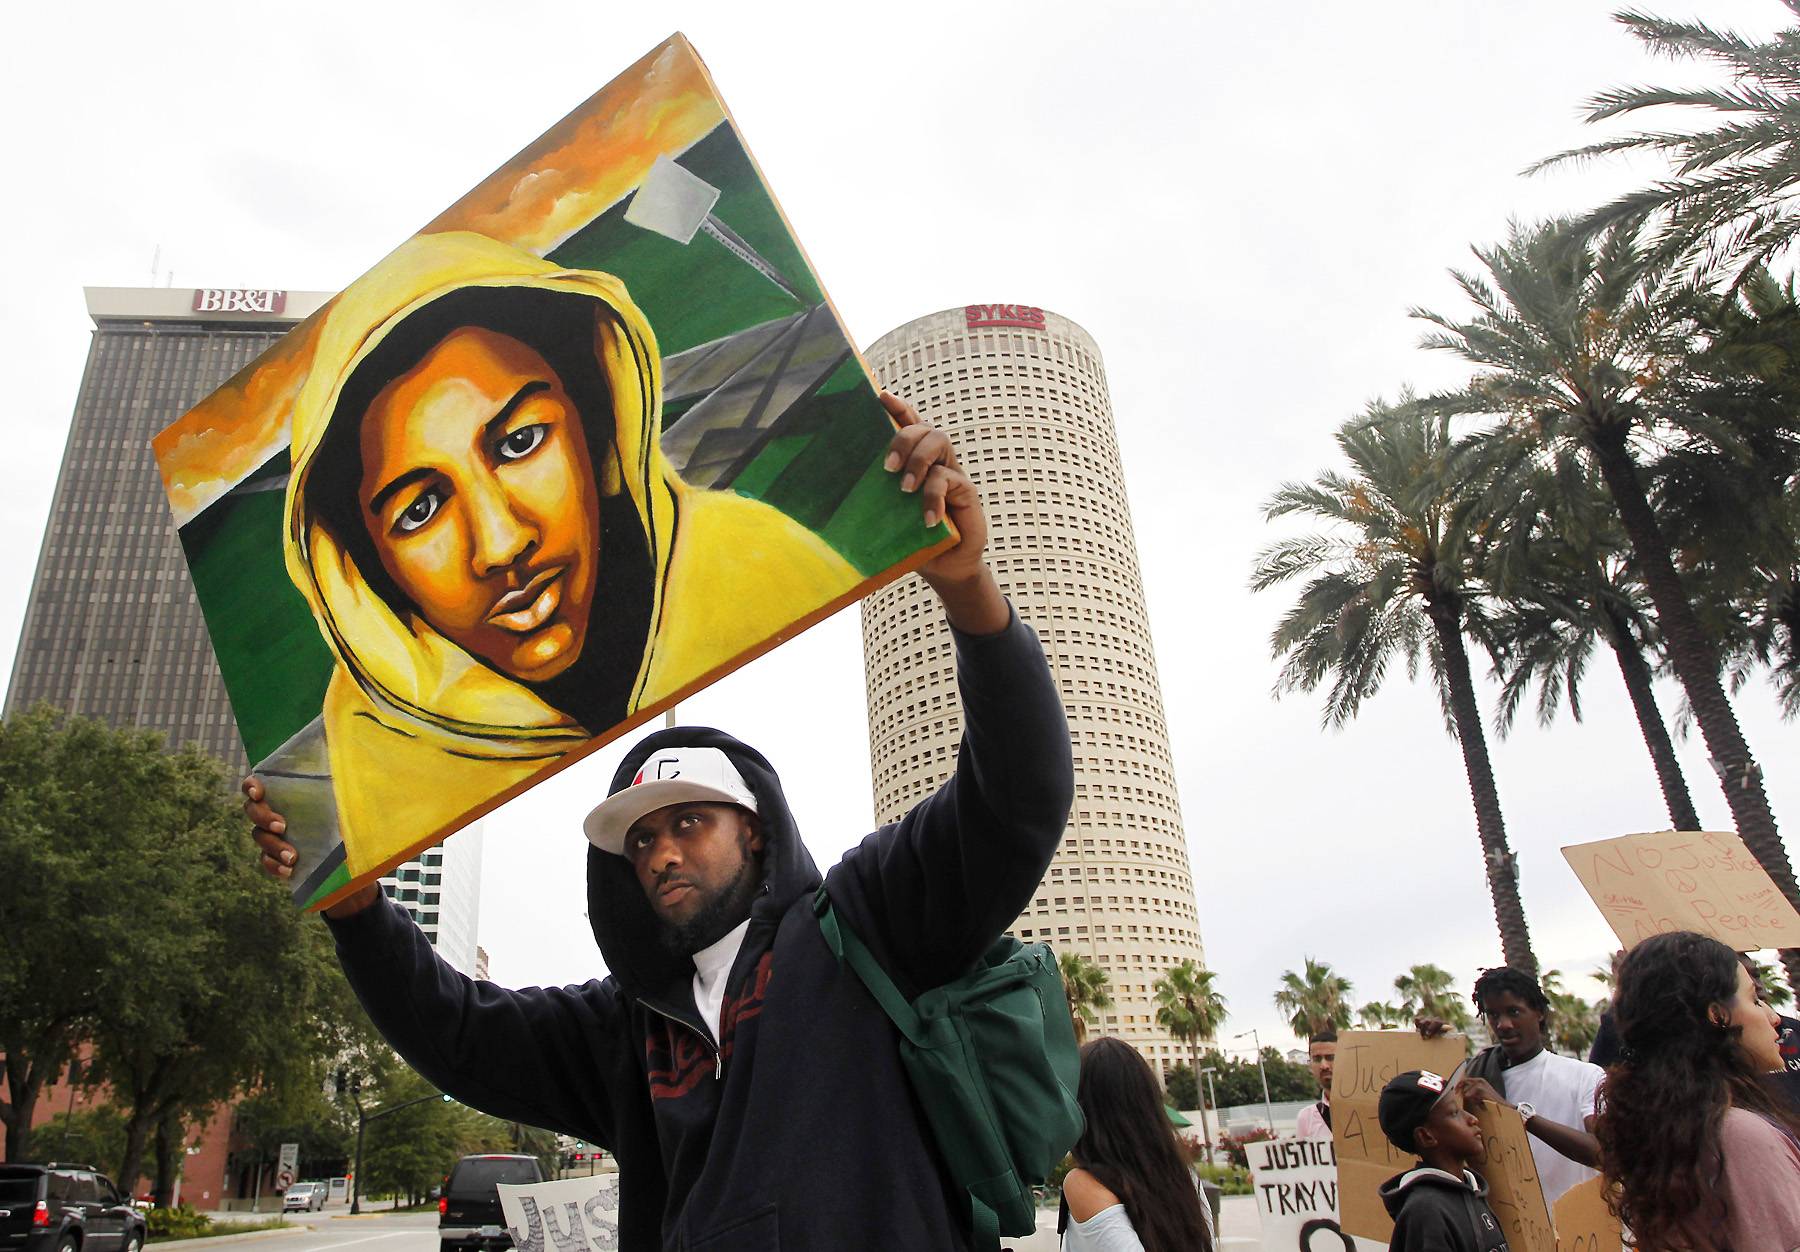 A Portrait of Trayvon - James Brewton, 39, holds up his portrait of Trayvon Martin called &quot;Innocent Eyes, Hard Streets&quot; at a park after marching to the federal courthouse in Tampa, Florida. &quot;I painted it last week,&quot; Brewton said to the Associated Press. &quot;I just had a feeling it wasn't going to go right.&quot; (Photo: AP Photo/Tampa Bay Times, Dirk Shadd)